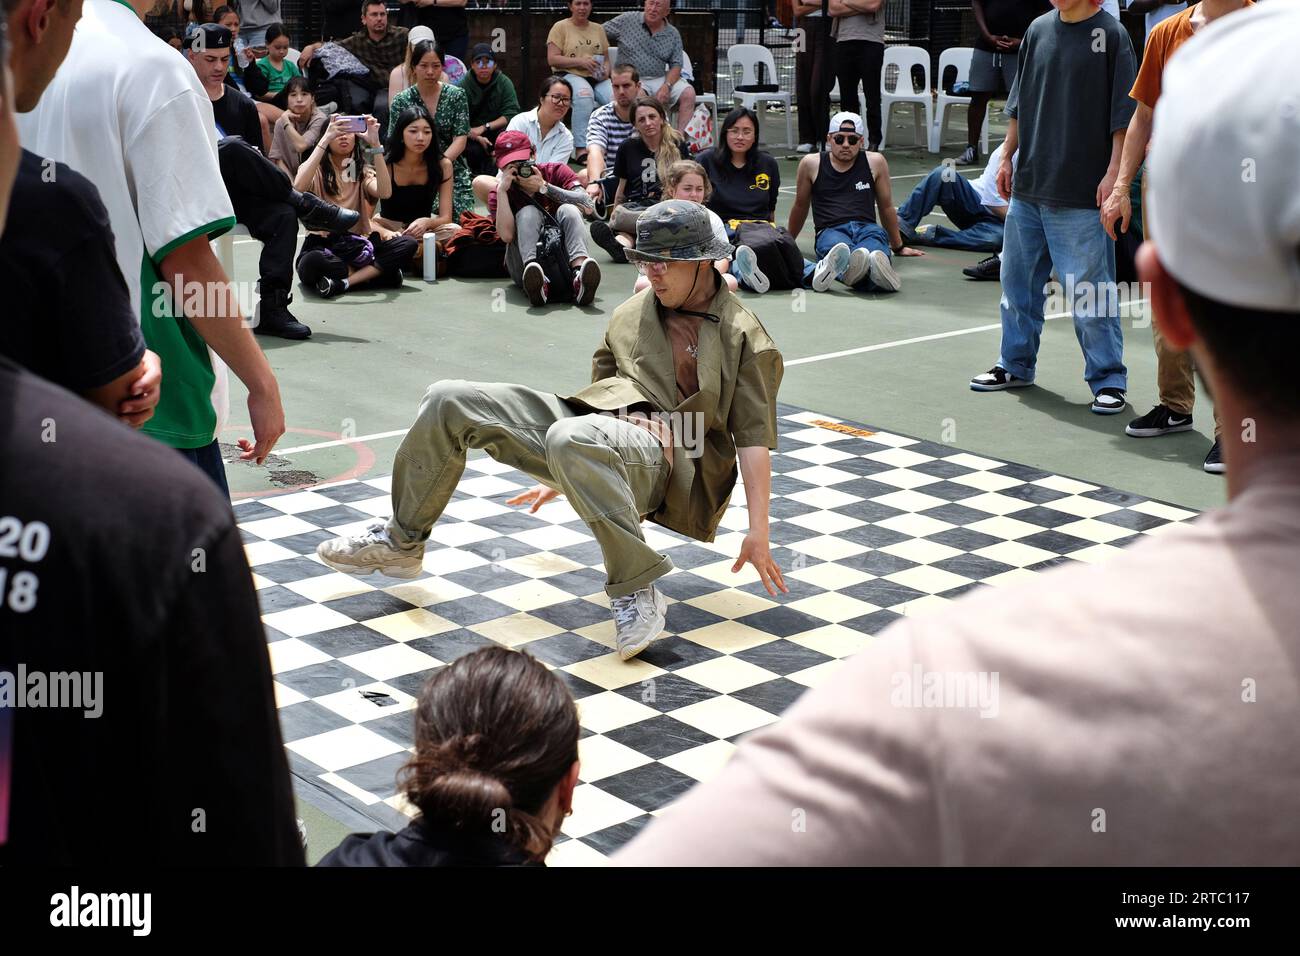 Breakdance 'Turtle' in a camo bucket hat - Breakdancing performances, competition and battles on the basketball courts of  Woolloomooloo, Sydney Stock Photo